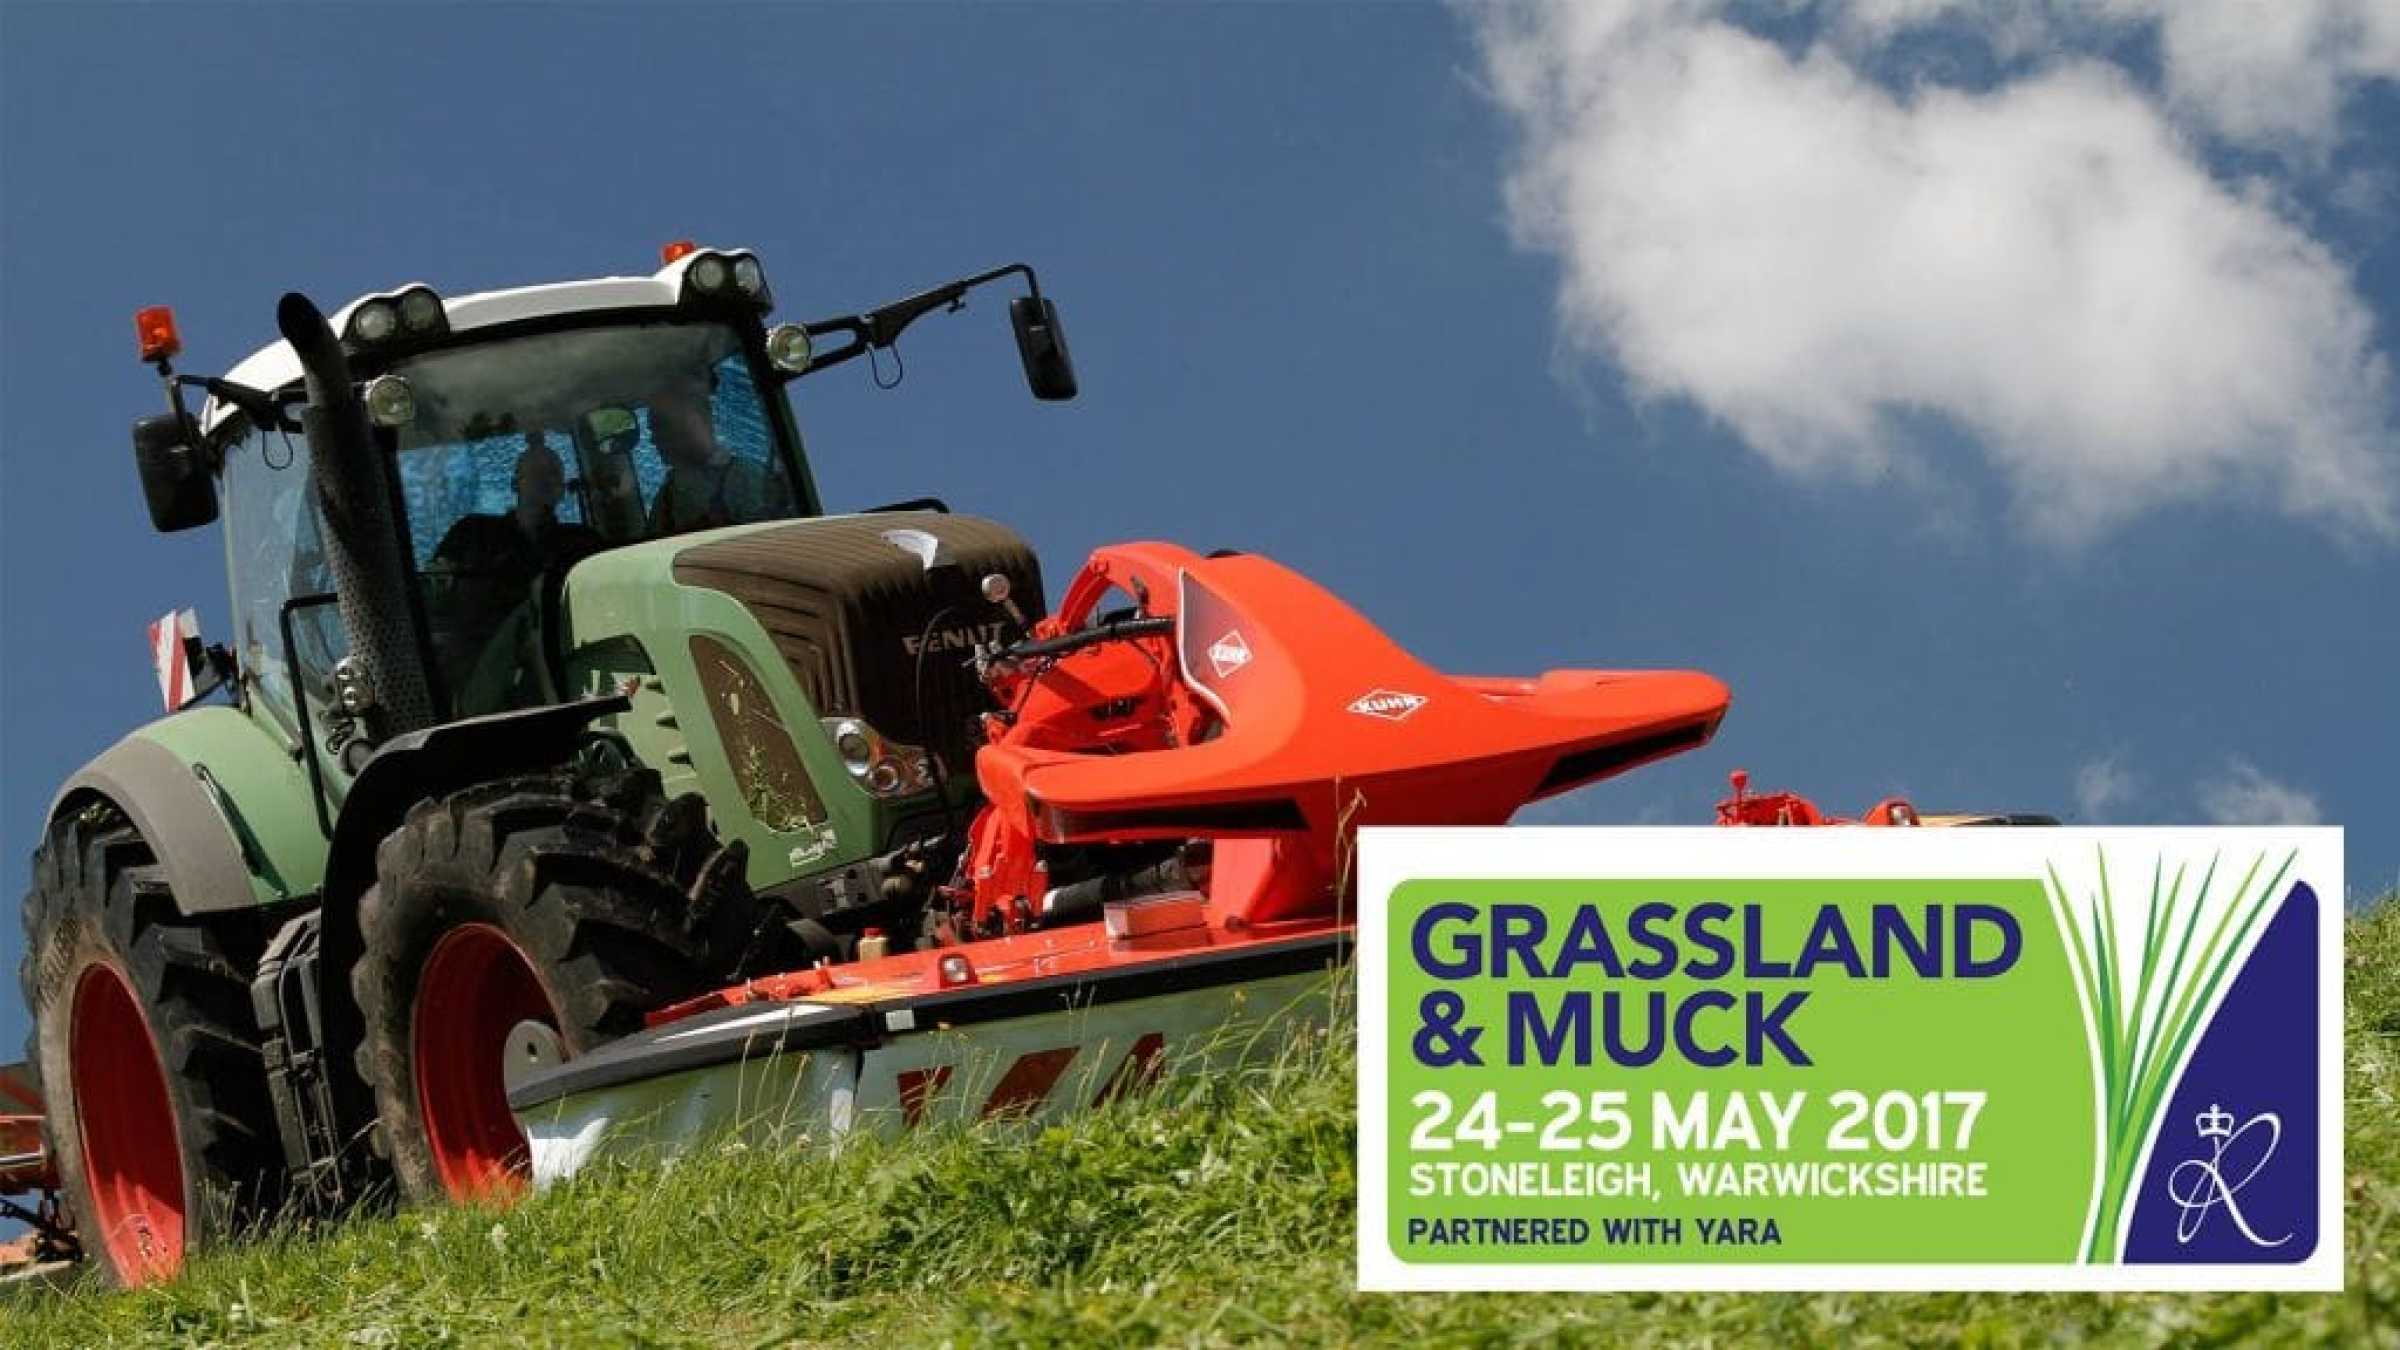 Join us at Grassland & Muck